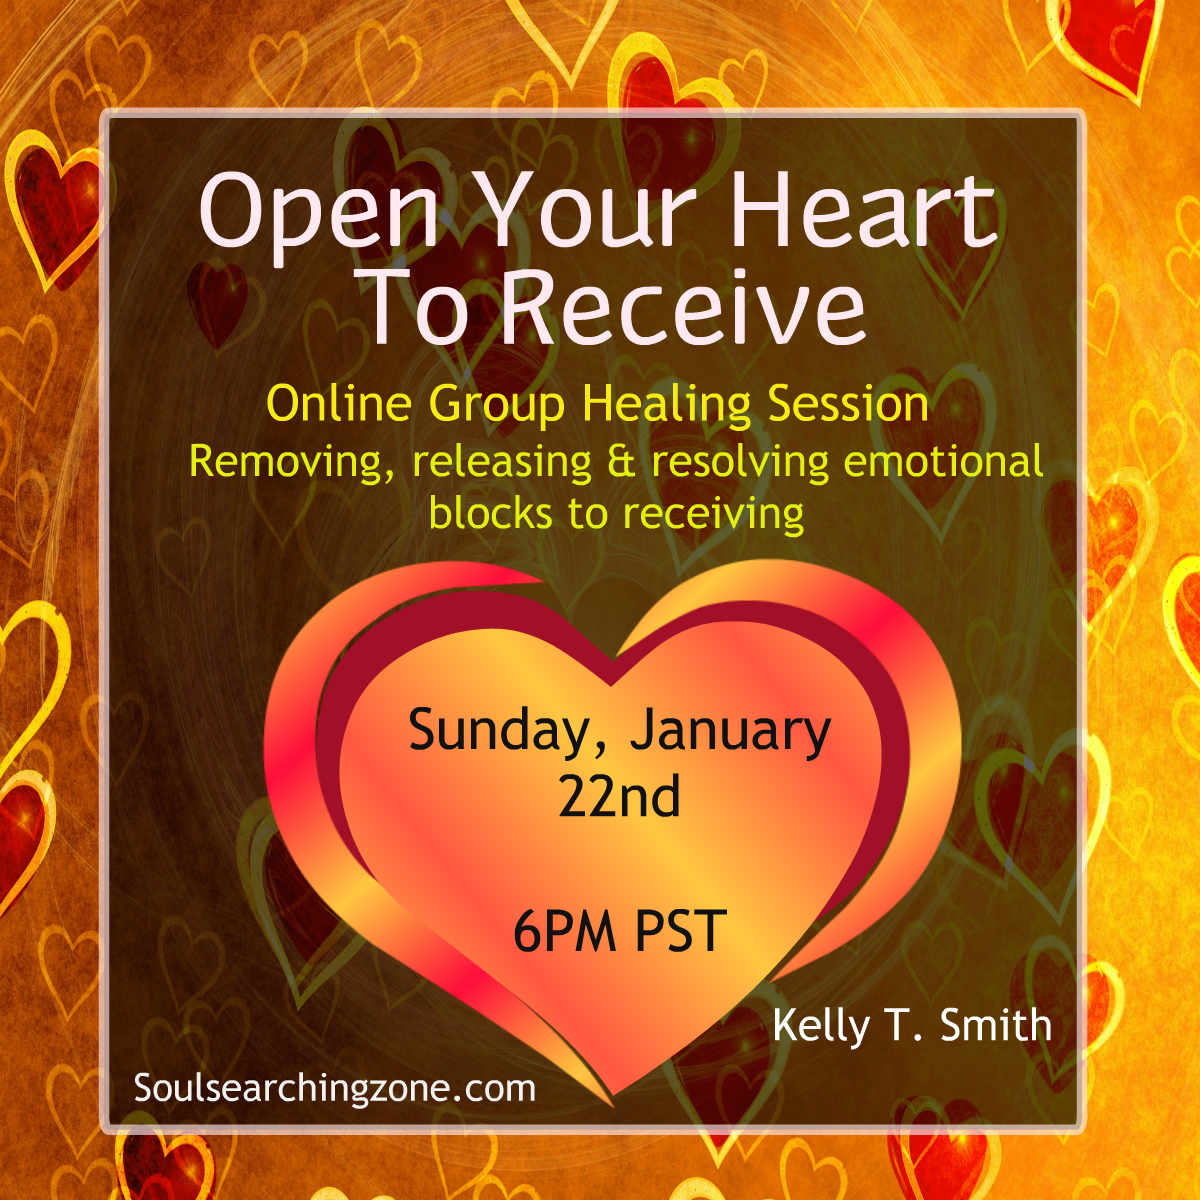 Group Online Healing Session- Open Your Heart to receive! 